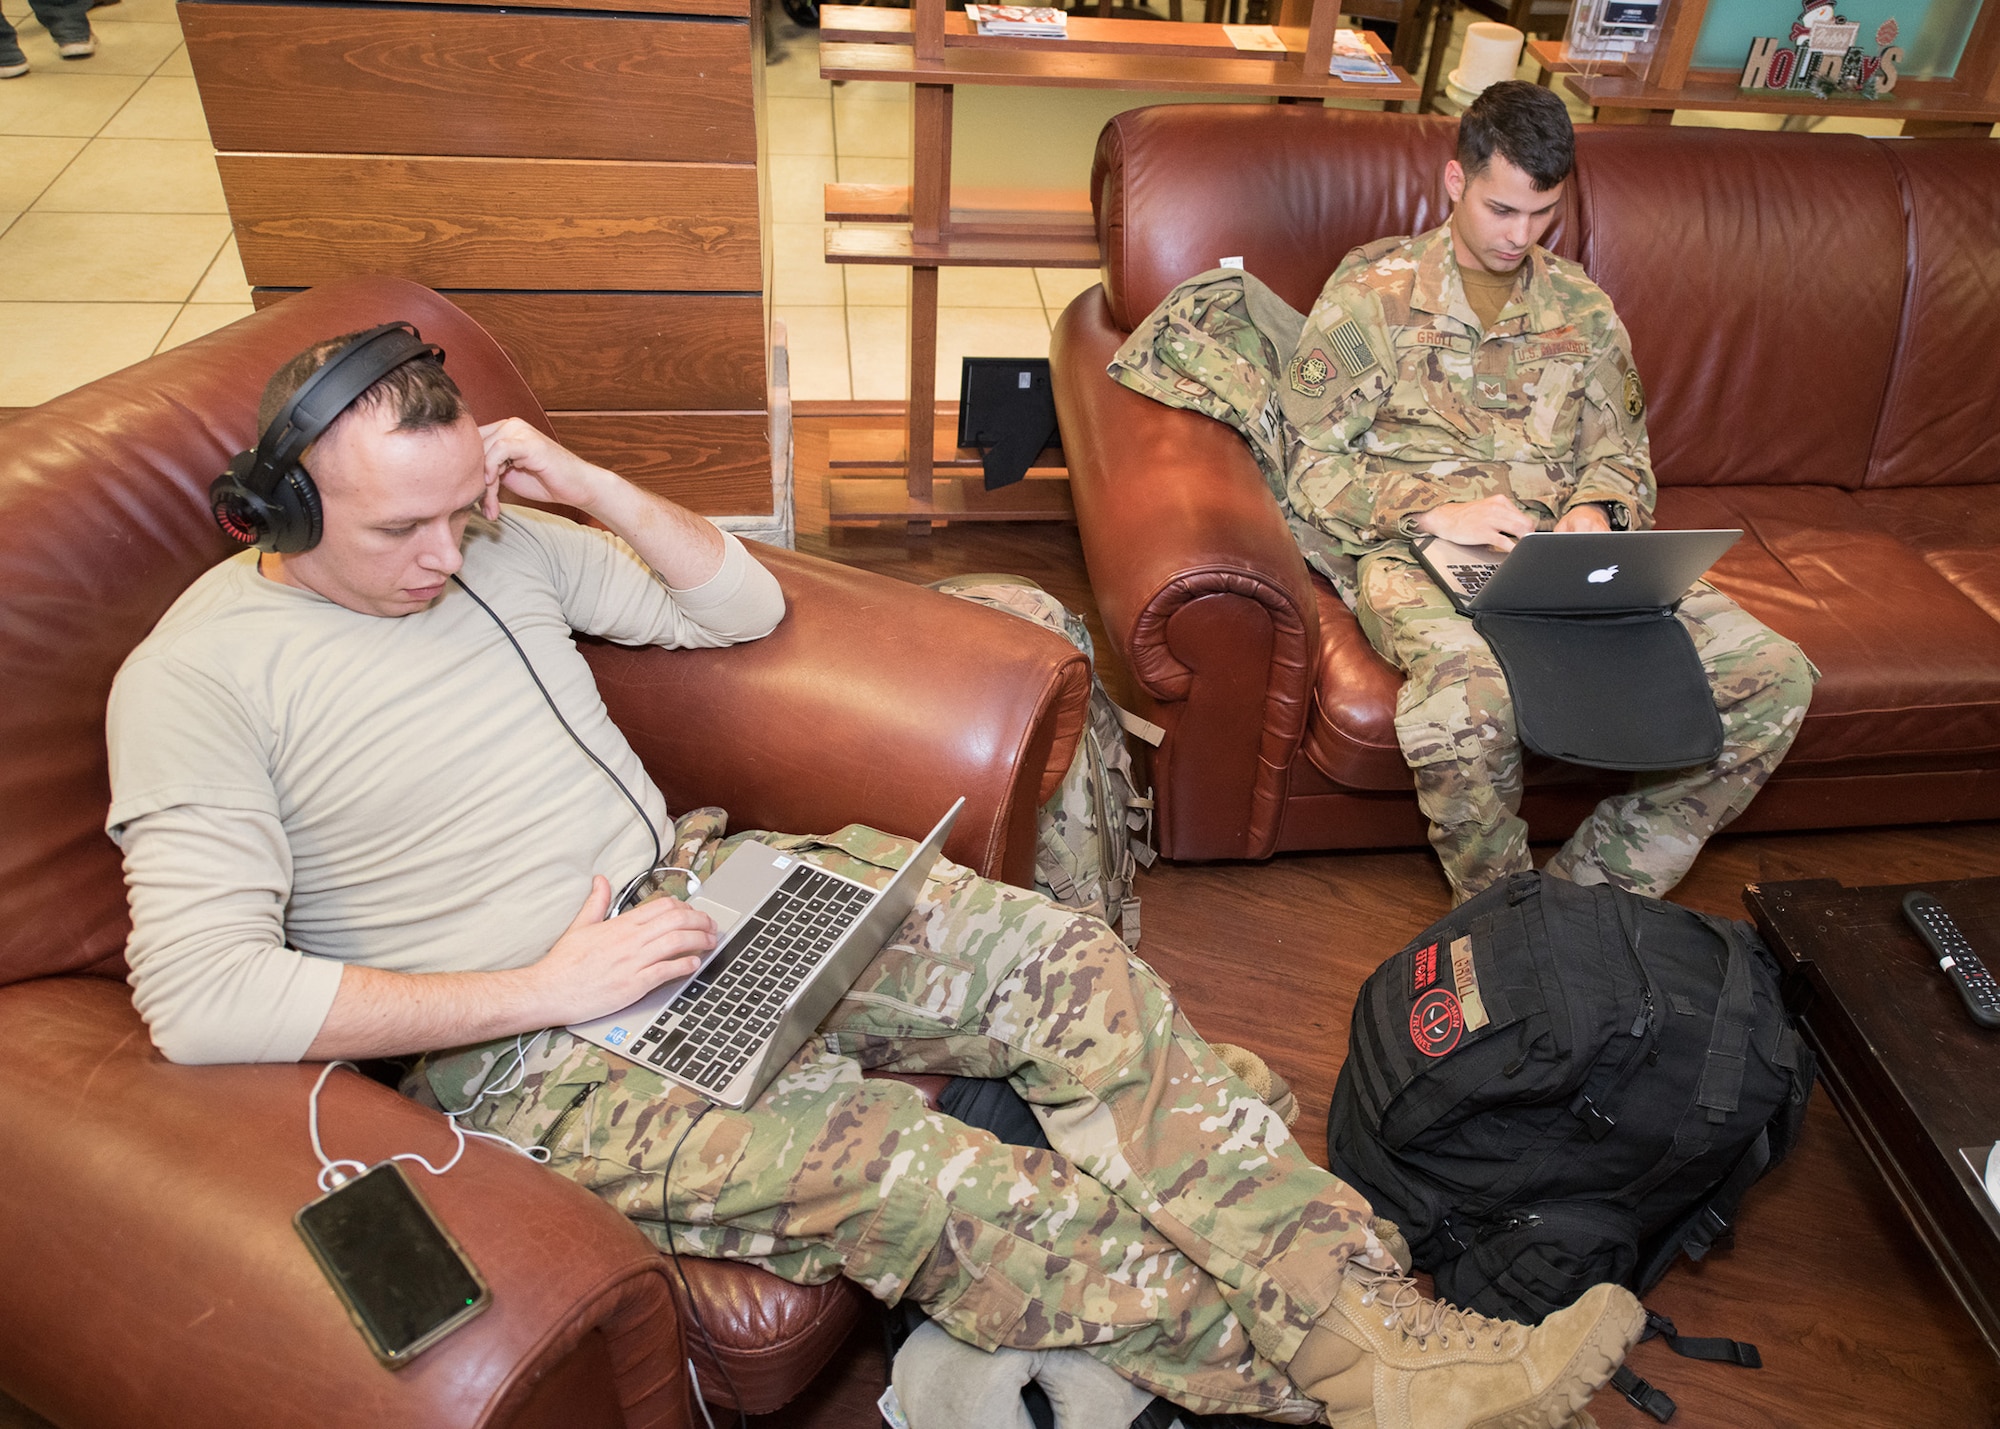 From left, Staff Sgts. Carlos Marles and Brian Groll, both aeromedical evacuation technicians assigned to the 375th Aeromedical Evacuation Squadron and 10th Expeditionary Aeromedical Evacuation Flight, respectively, relax at the USO Delaware Terminal Community Center as they wait Jan. 18, 2019, at Dover Air Force Base, Delaware, for a flight to Europe. The USO center offers drinks, snacks and entertainment, as well as cellphone charging stations and an internet café with free Wi-Fi for traveling retirees, service members and their families. (U.S. Air Force photo by Mauricio Campino)